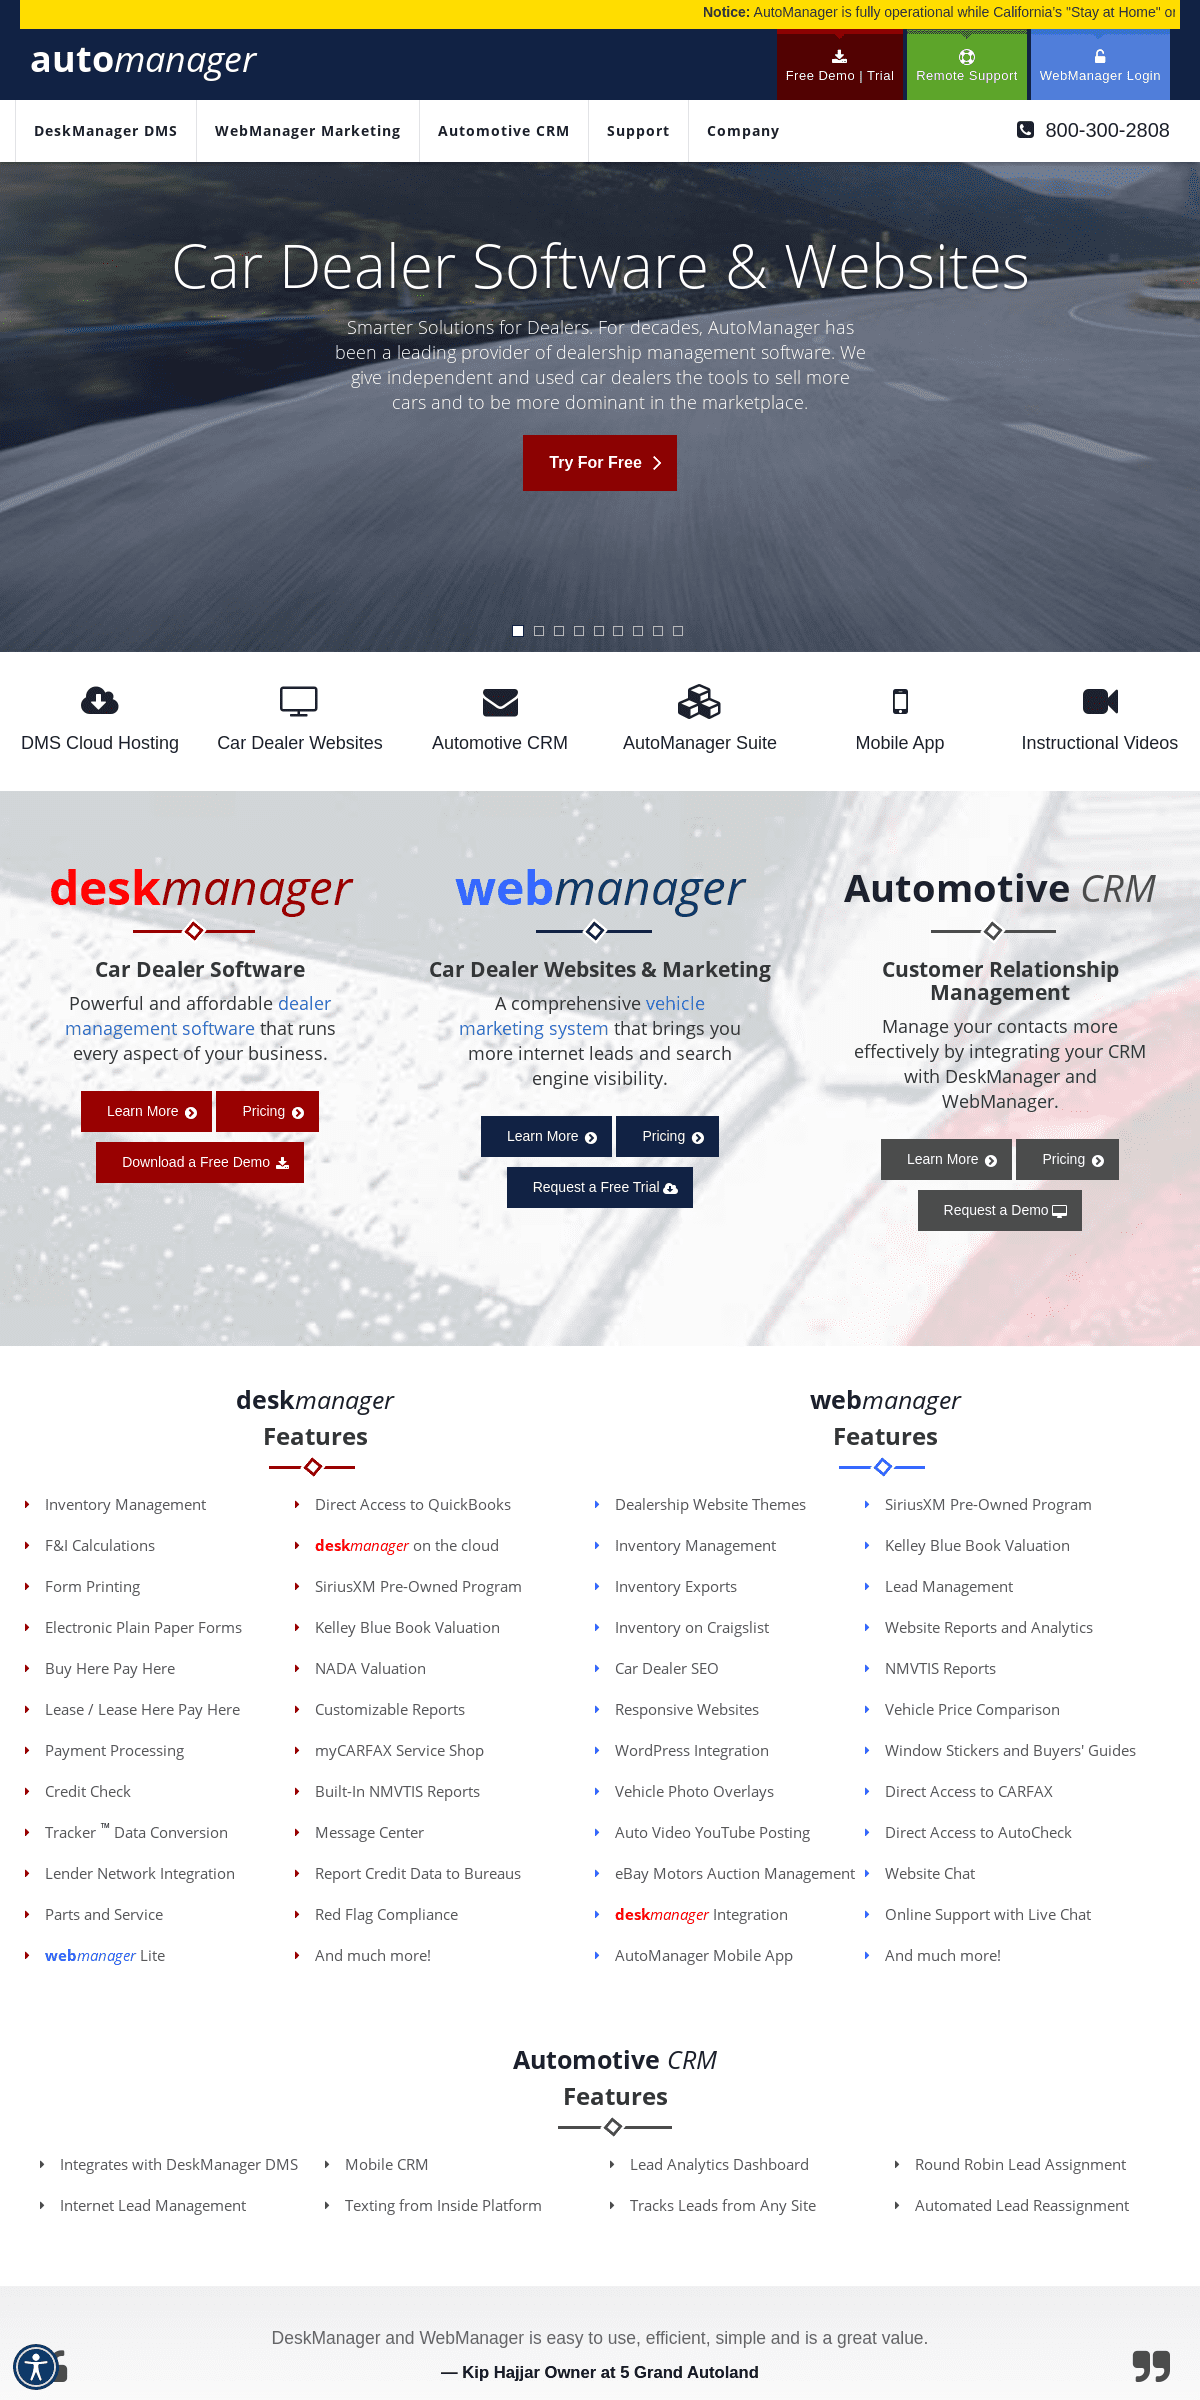 A complete backup of automanager.com